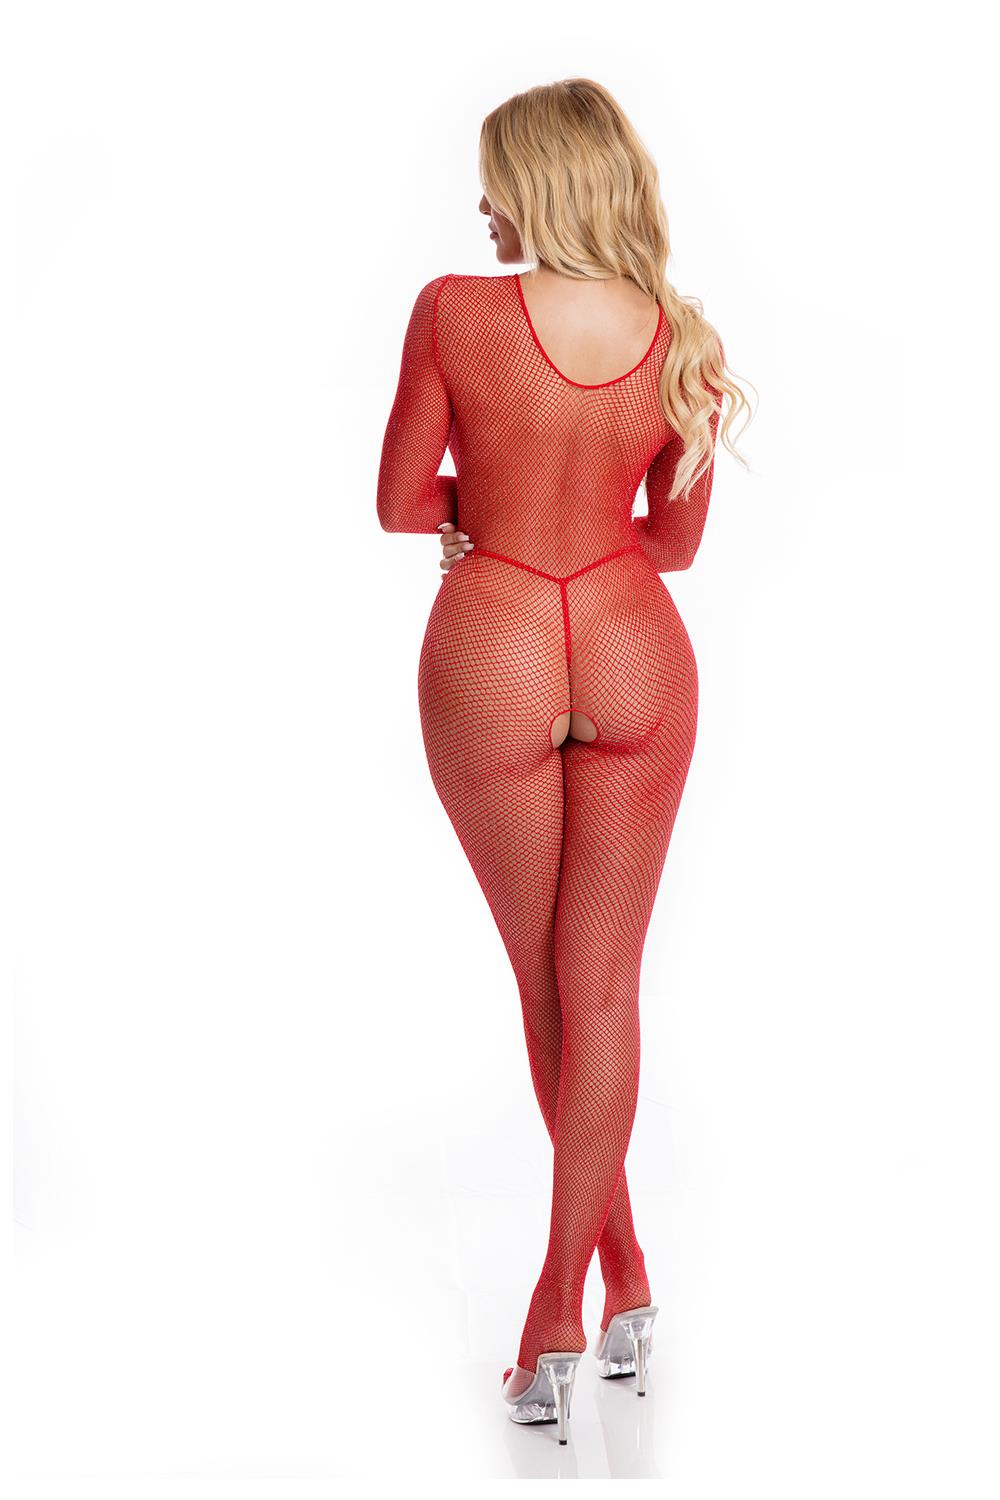 Risque Crotchless Bodystocking Red S/m